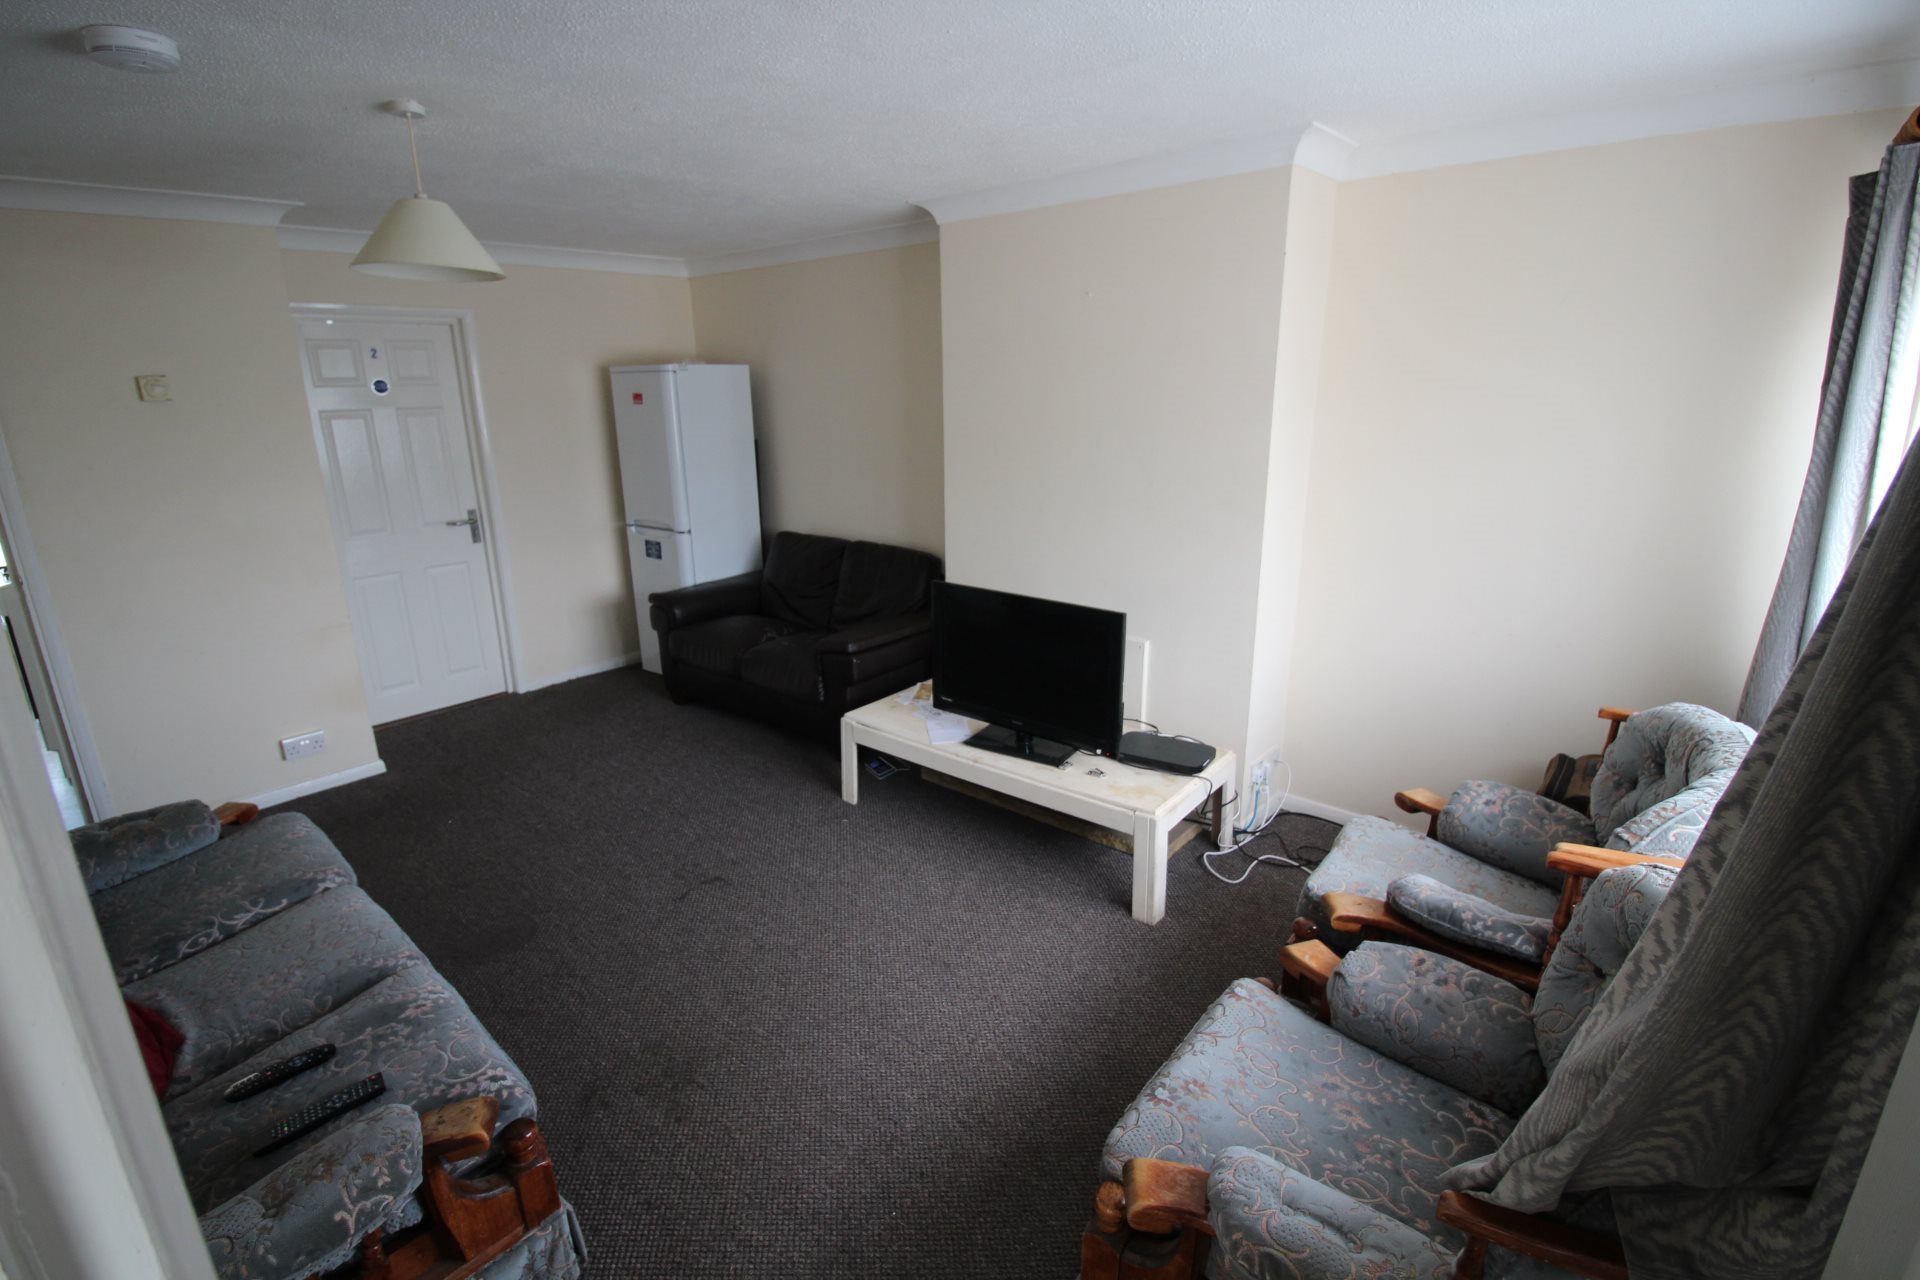 1 bed house / flat share to rent in Petworth Close, Wivenhoe  - Property Image 2